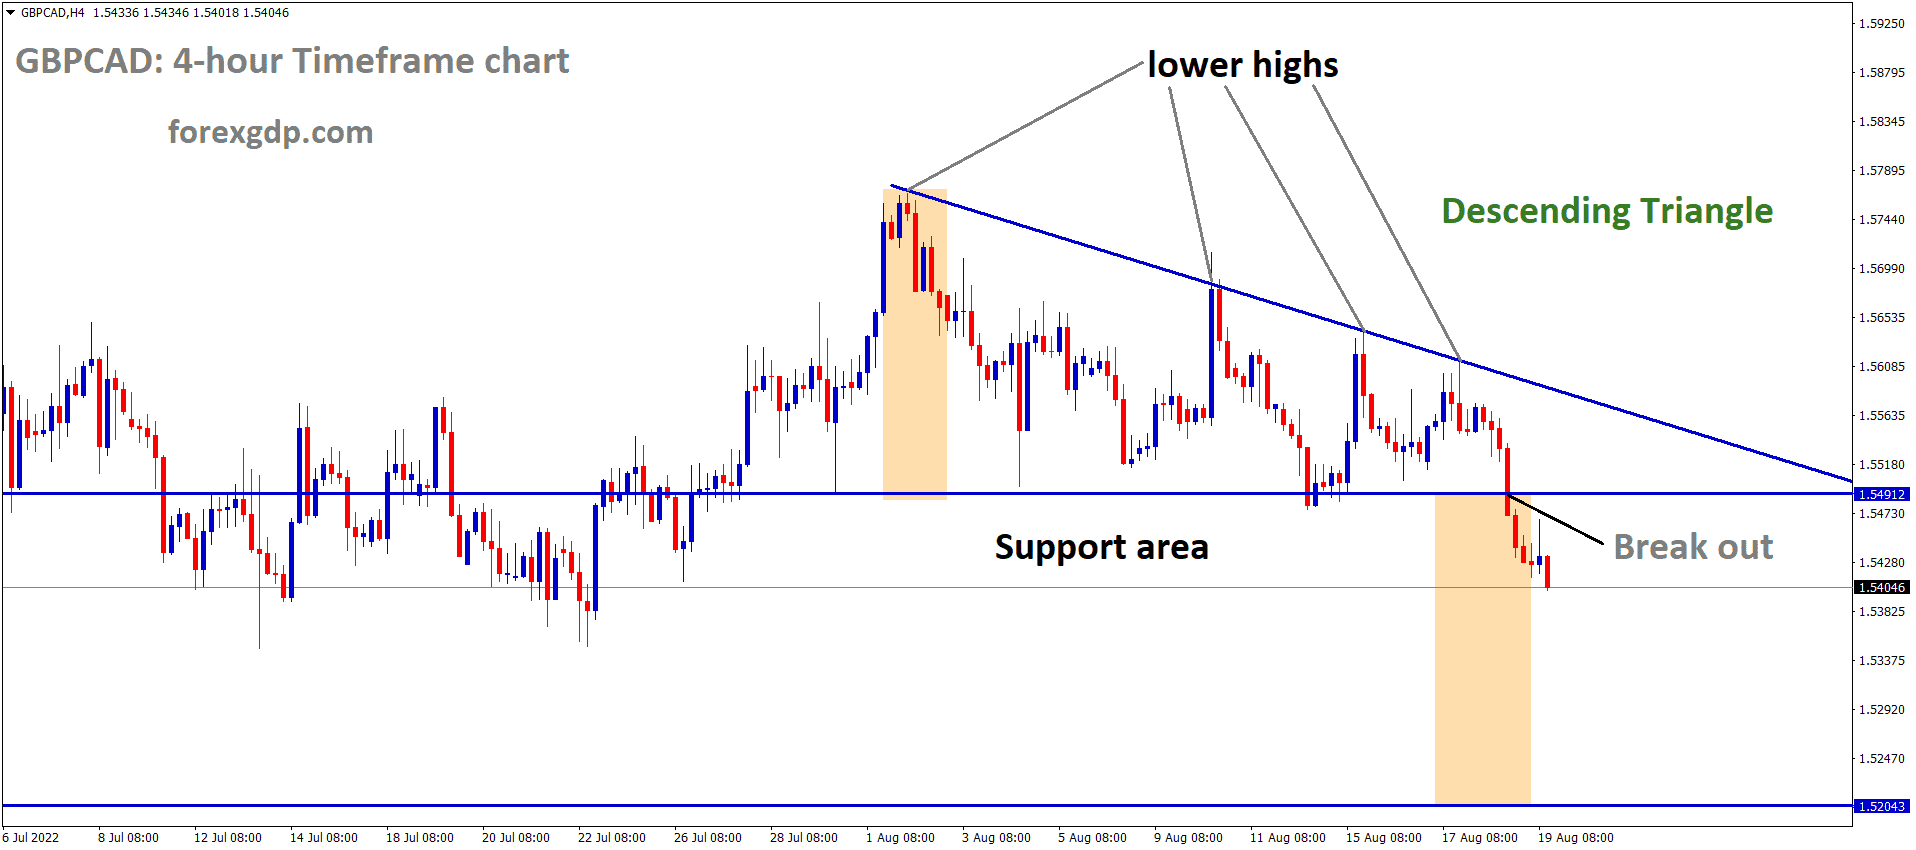 GBPCAD has broken the Descending triangle pattern in downside.